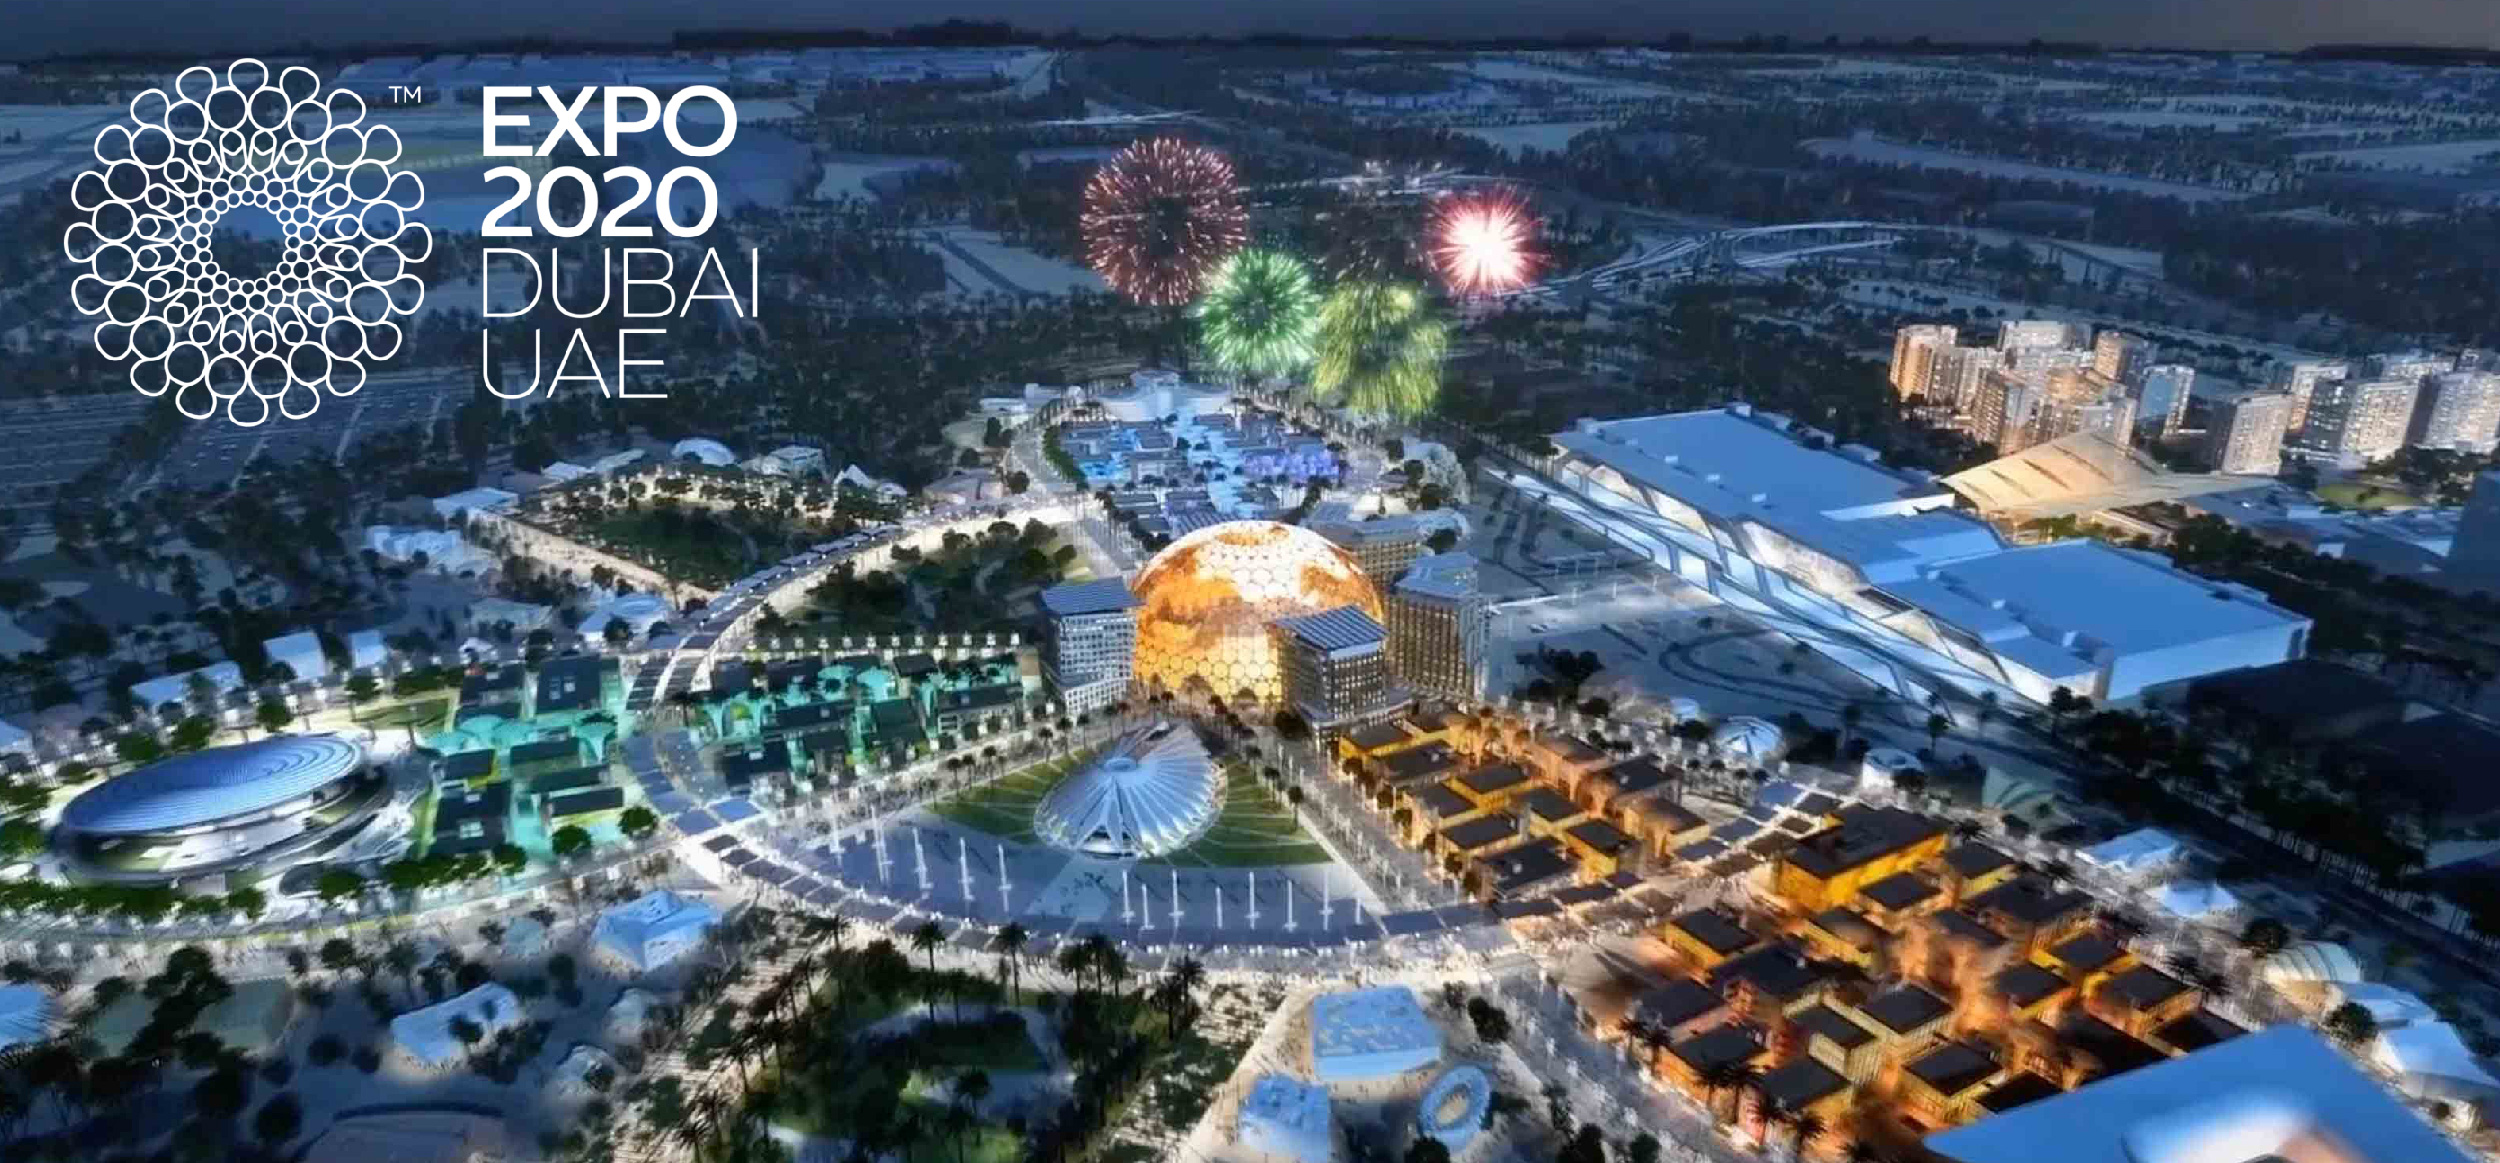 National Pavilions at Expo 2020: 5 of the Most Dynamic Designs So Far